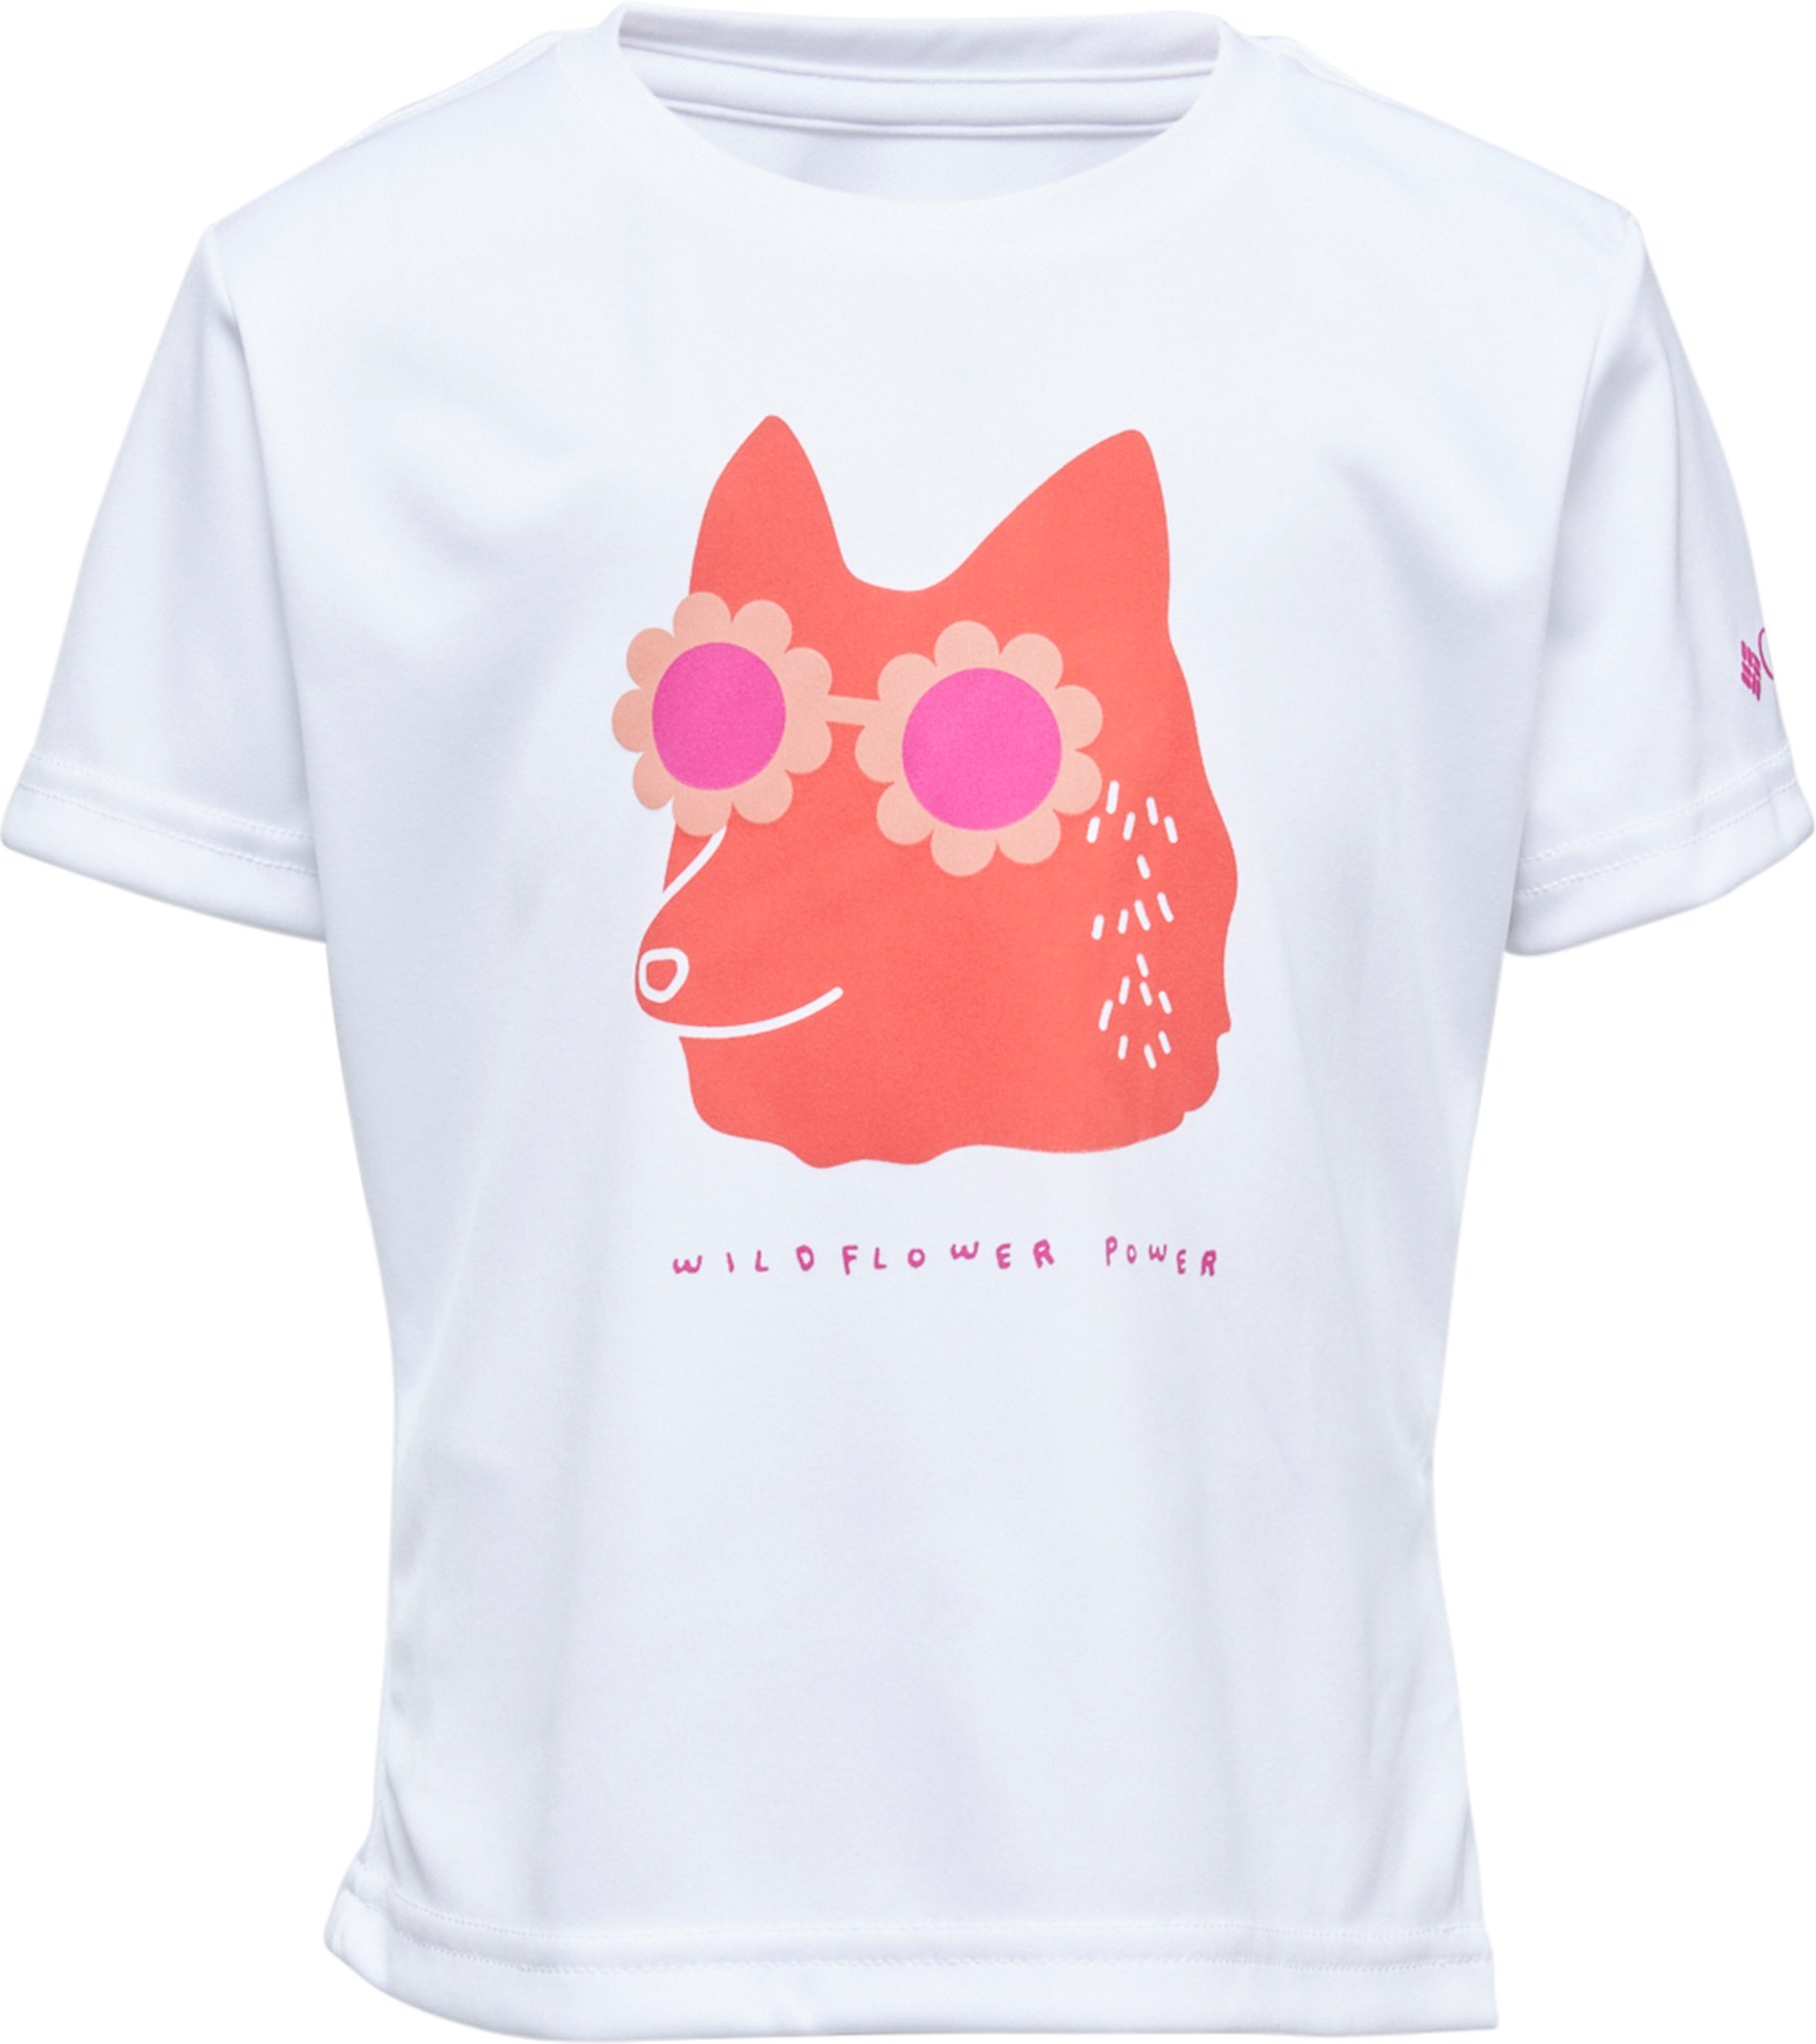 Columbia Mission Peak Short Sleeve Graphic T-Shirt - Girls S Peach Heather - Inverted Stripes Graphic